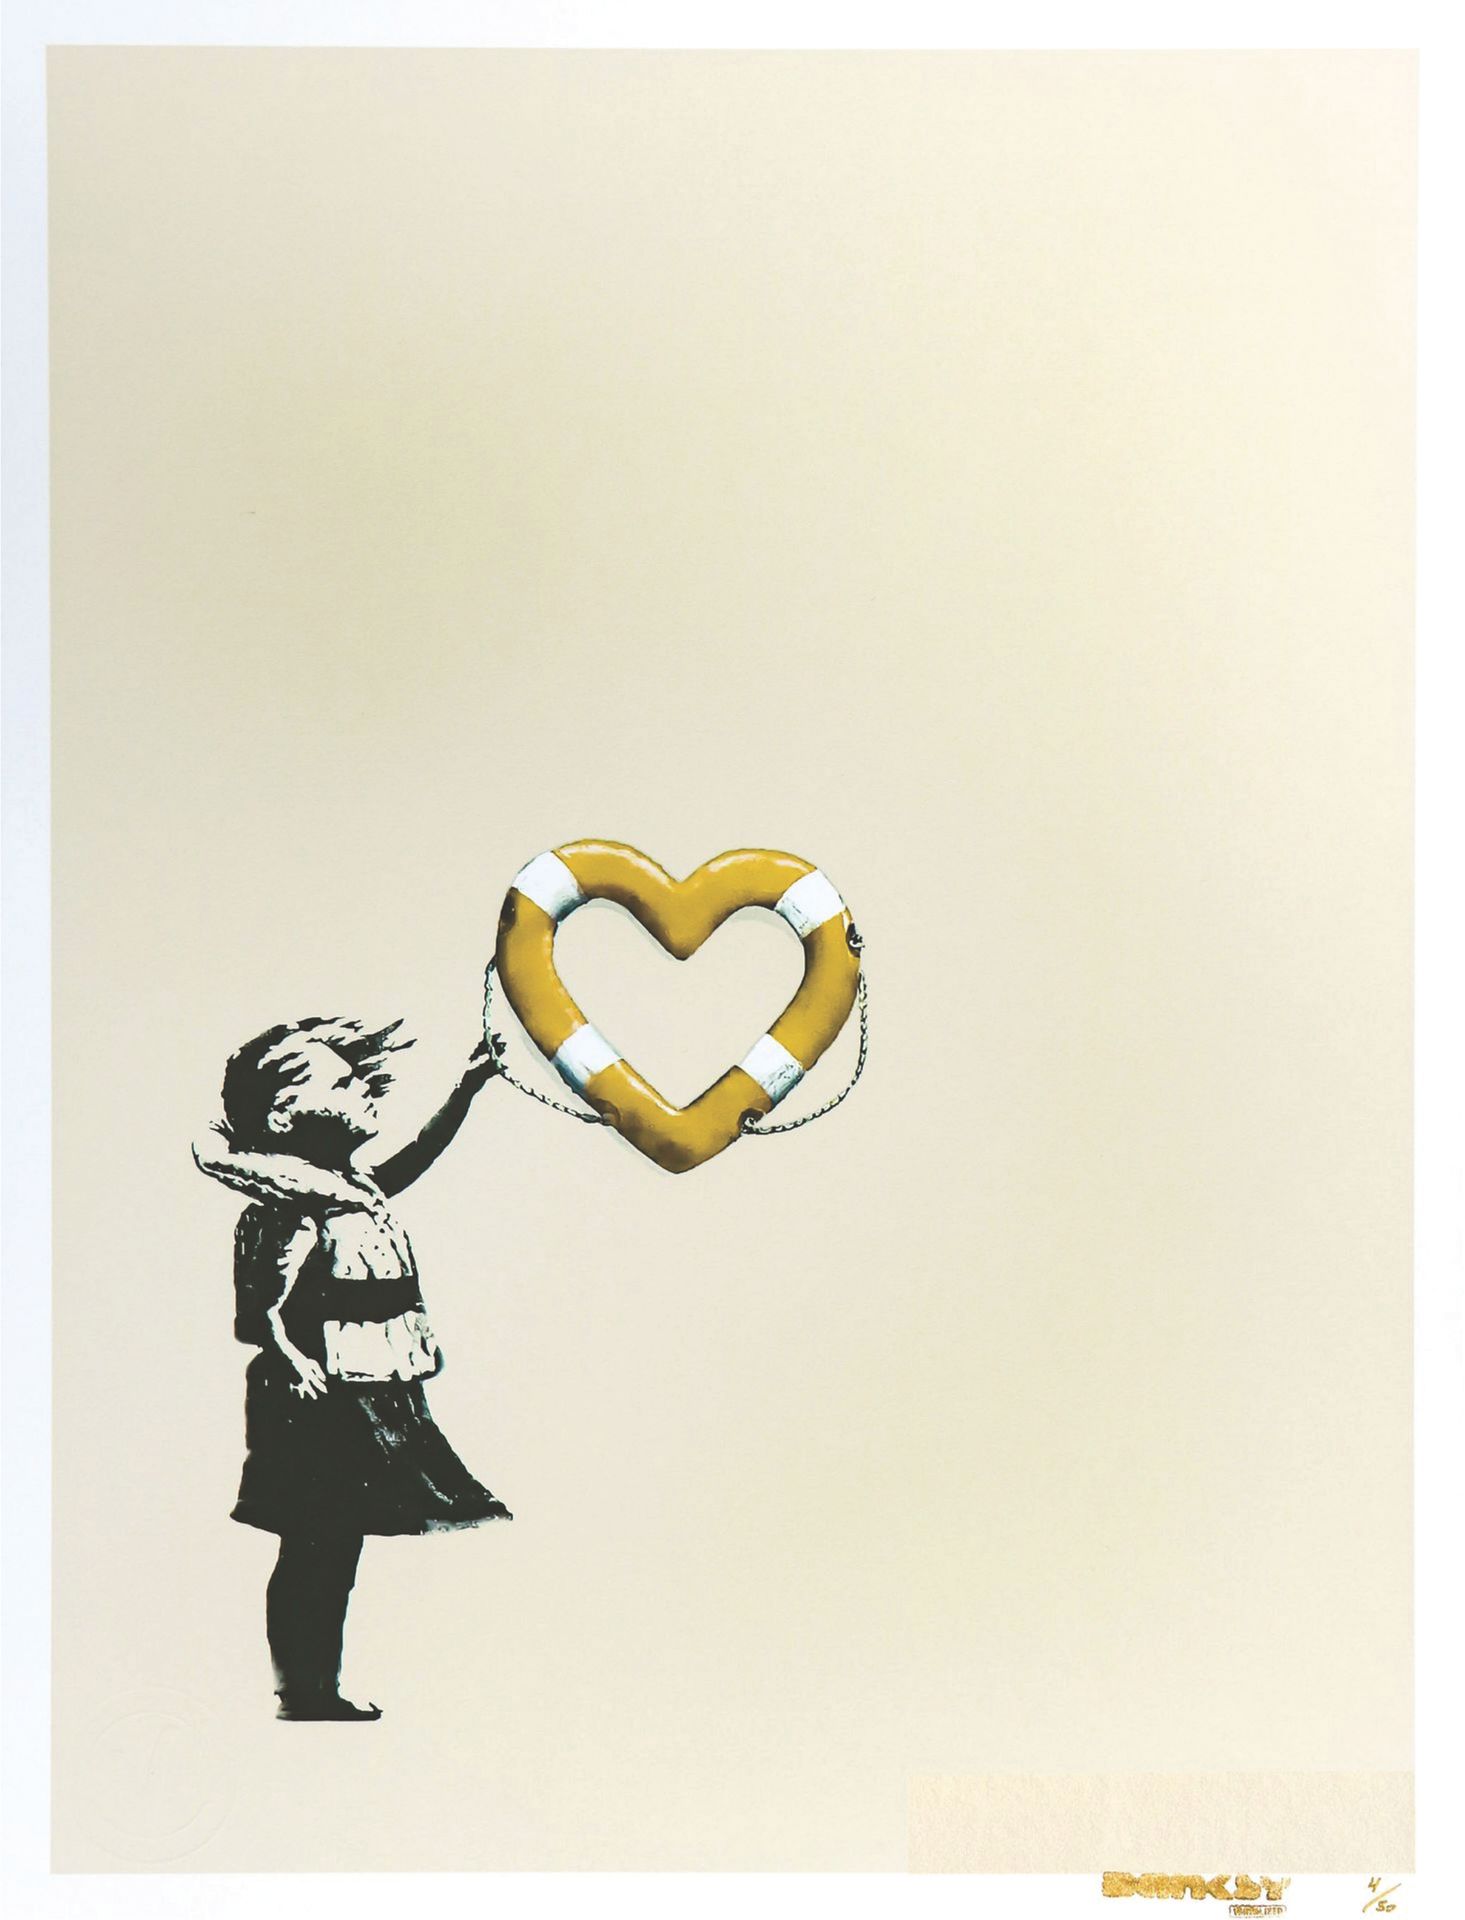 Null BANKSY (1974), after x Post Modern Vandal

Girl with heart shaped float

(G&hellip;